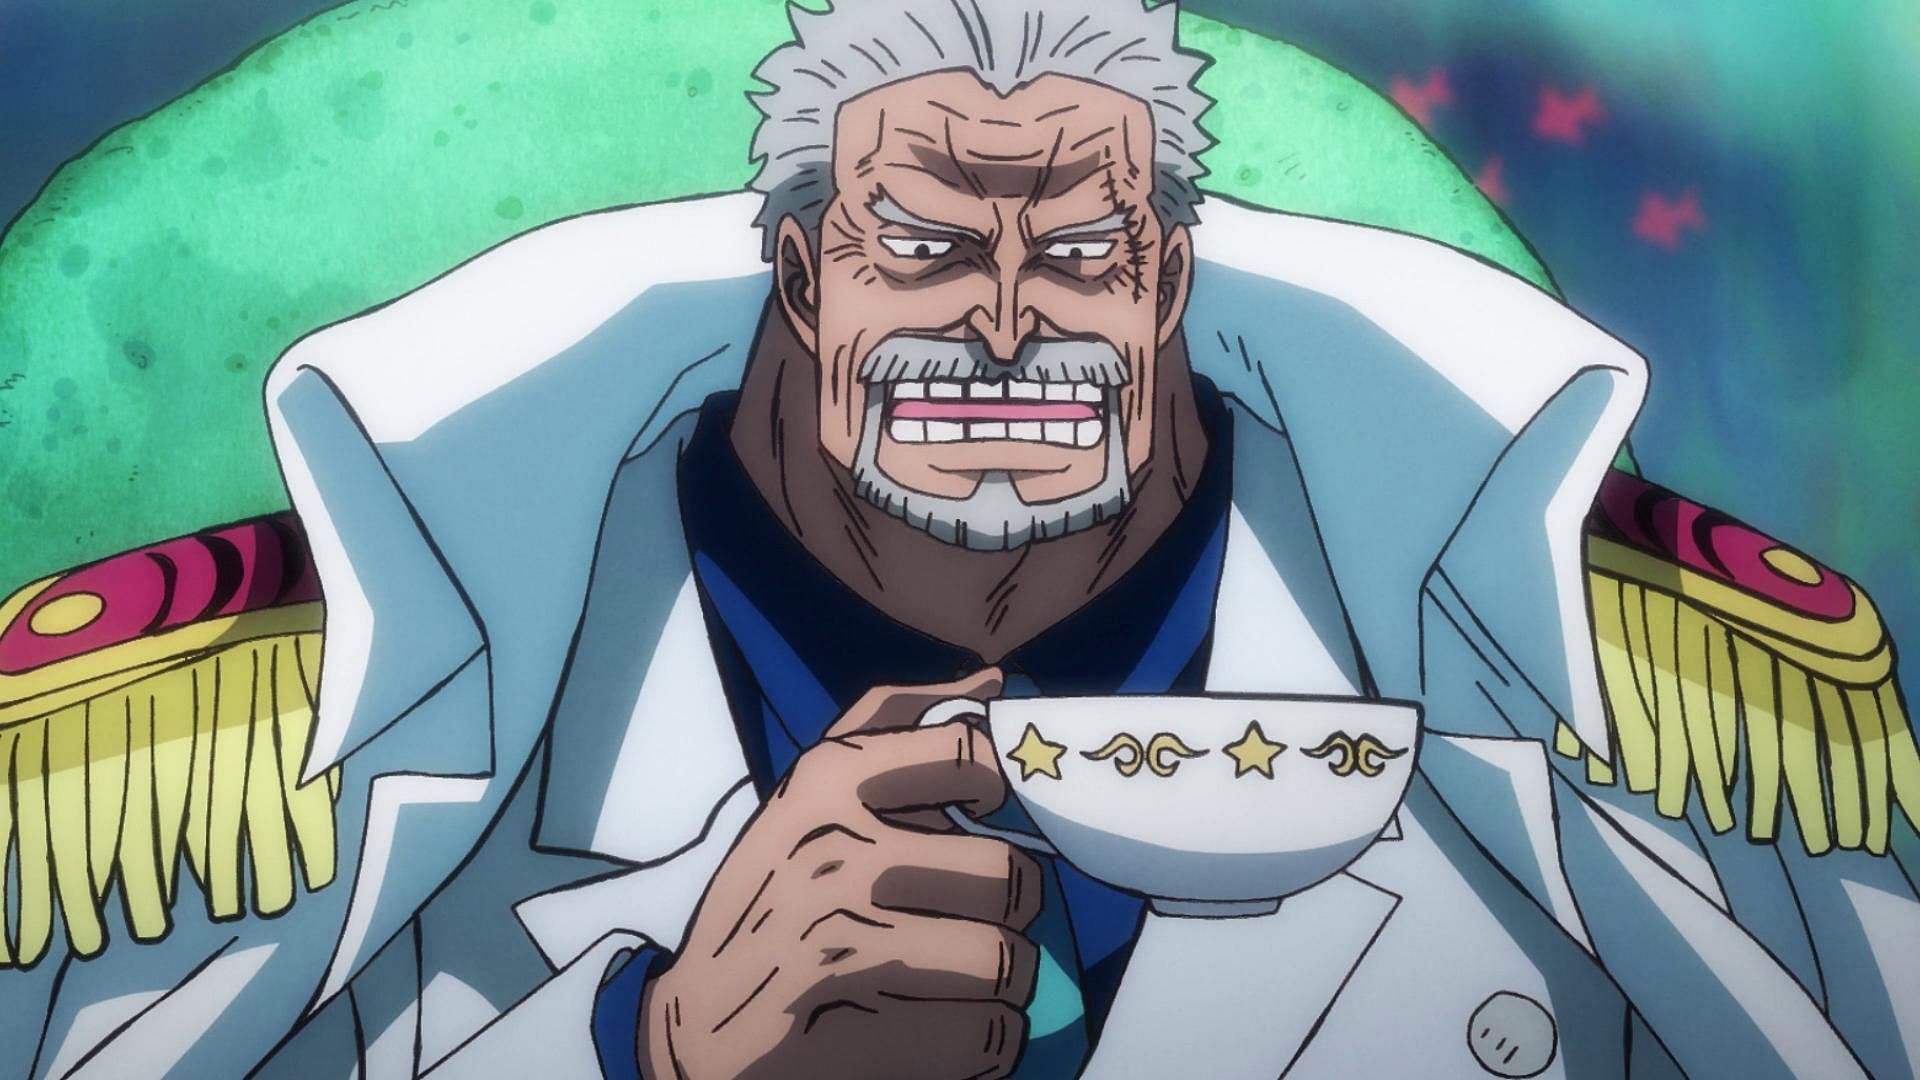 78-year-old Garp can still compete with the top tiers (Image via Toei Animation, One Piece)